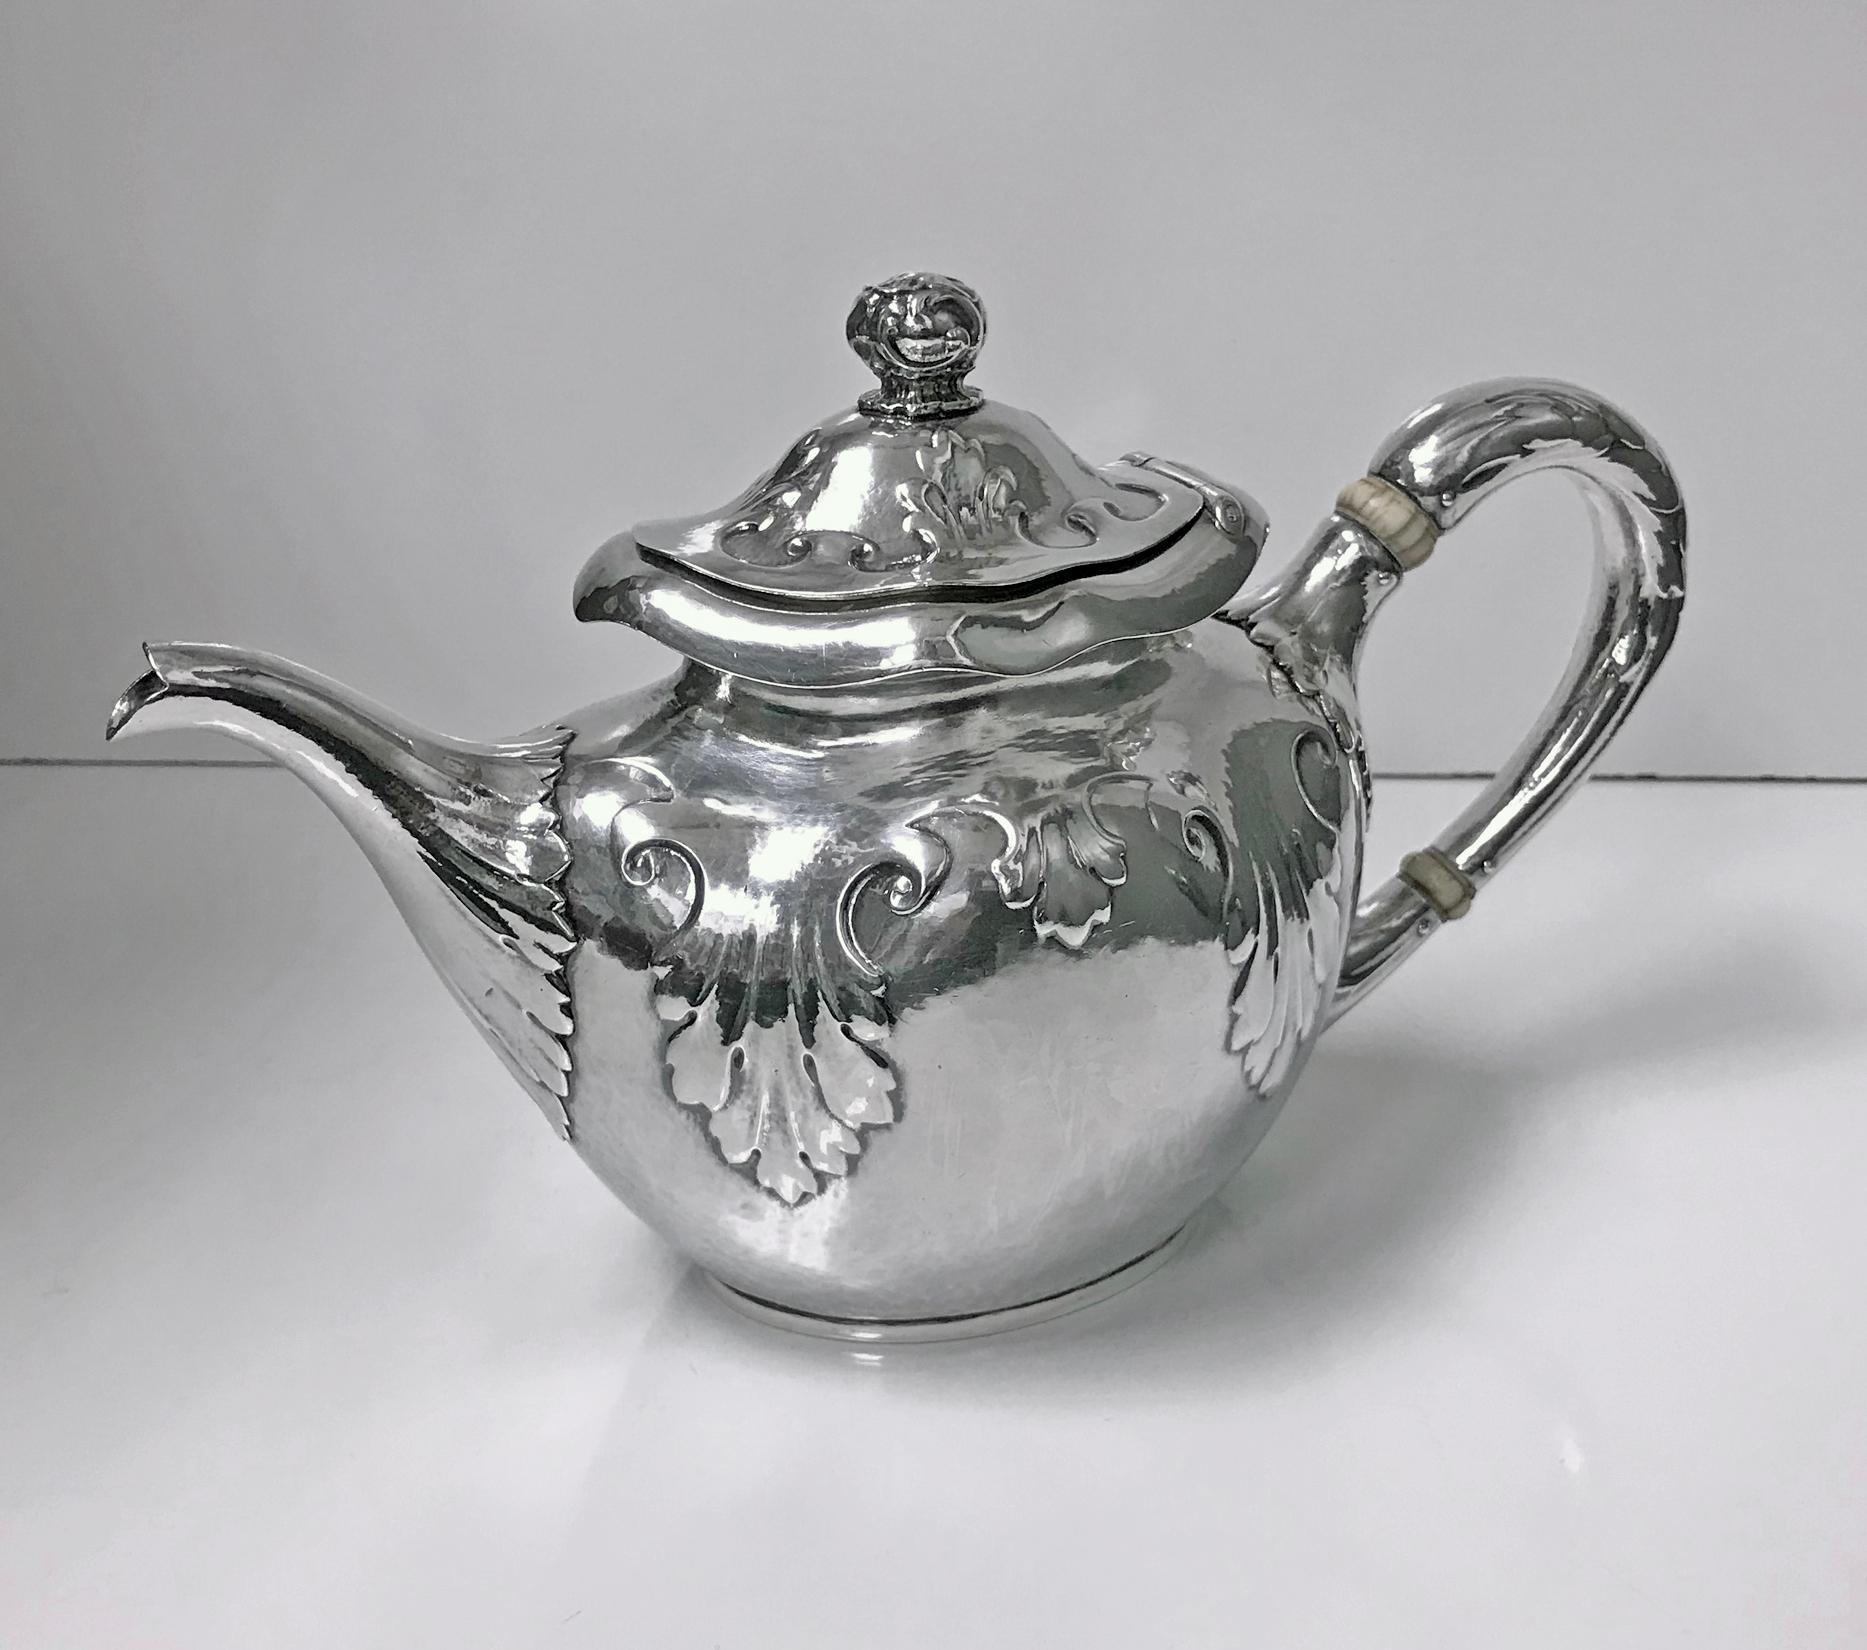 Rare design Gorham Sterling Art Nouveau Arts & Crafts hammered tea and coffee set. The set comprising coffee pot, teapot, covered sugar bowl, cream jug and waste bowl. All with a wonderful combined Nouveau Arts & Crafts stylised hand-hammered